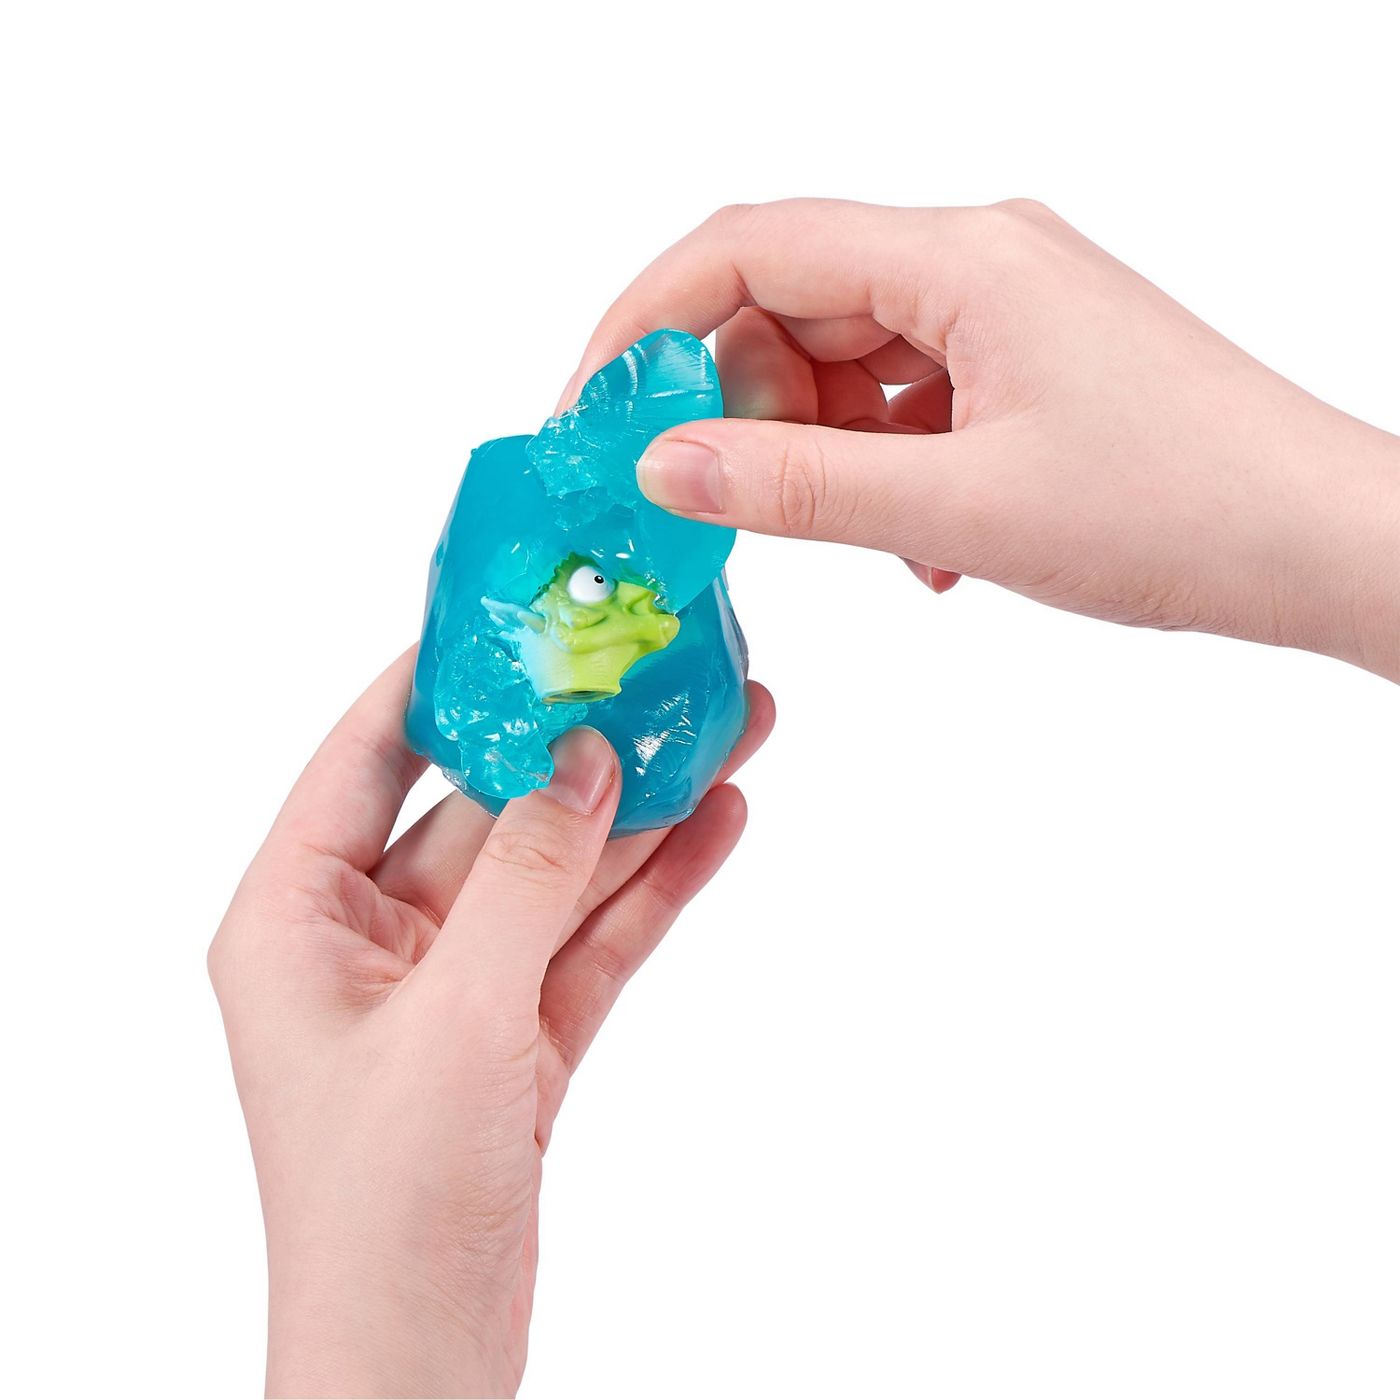 Smashers Small Dino Thaw Egg Surprise Toy, Series 4